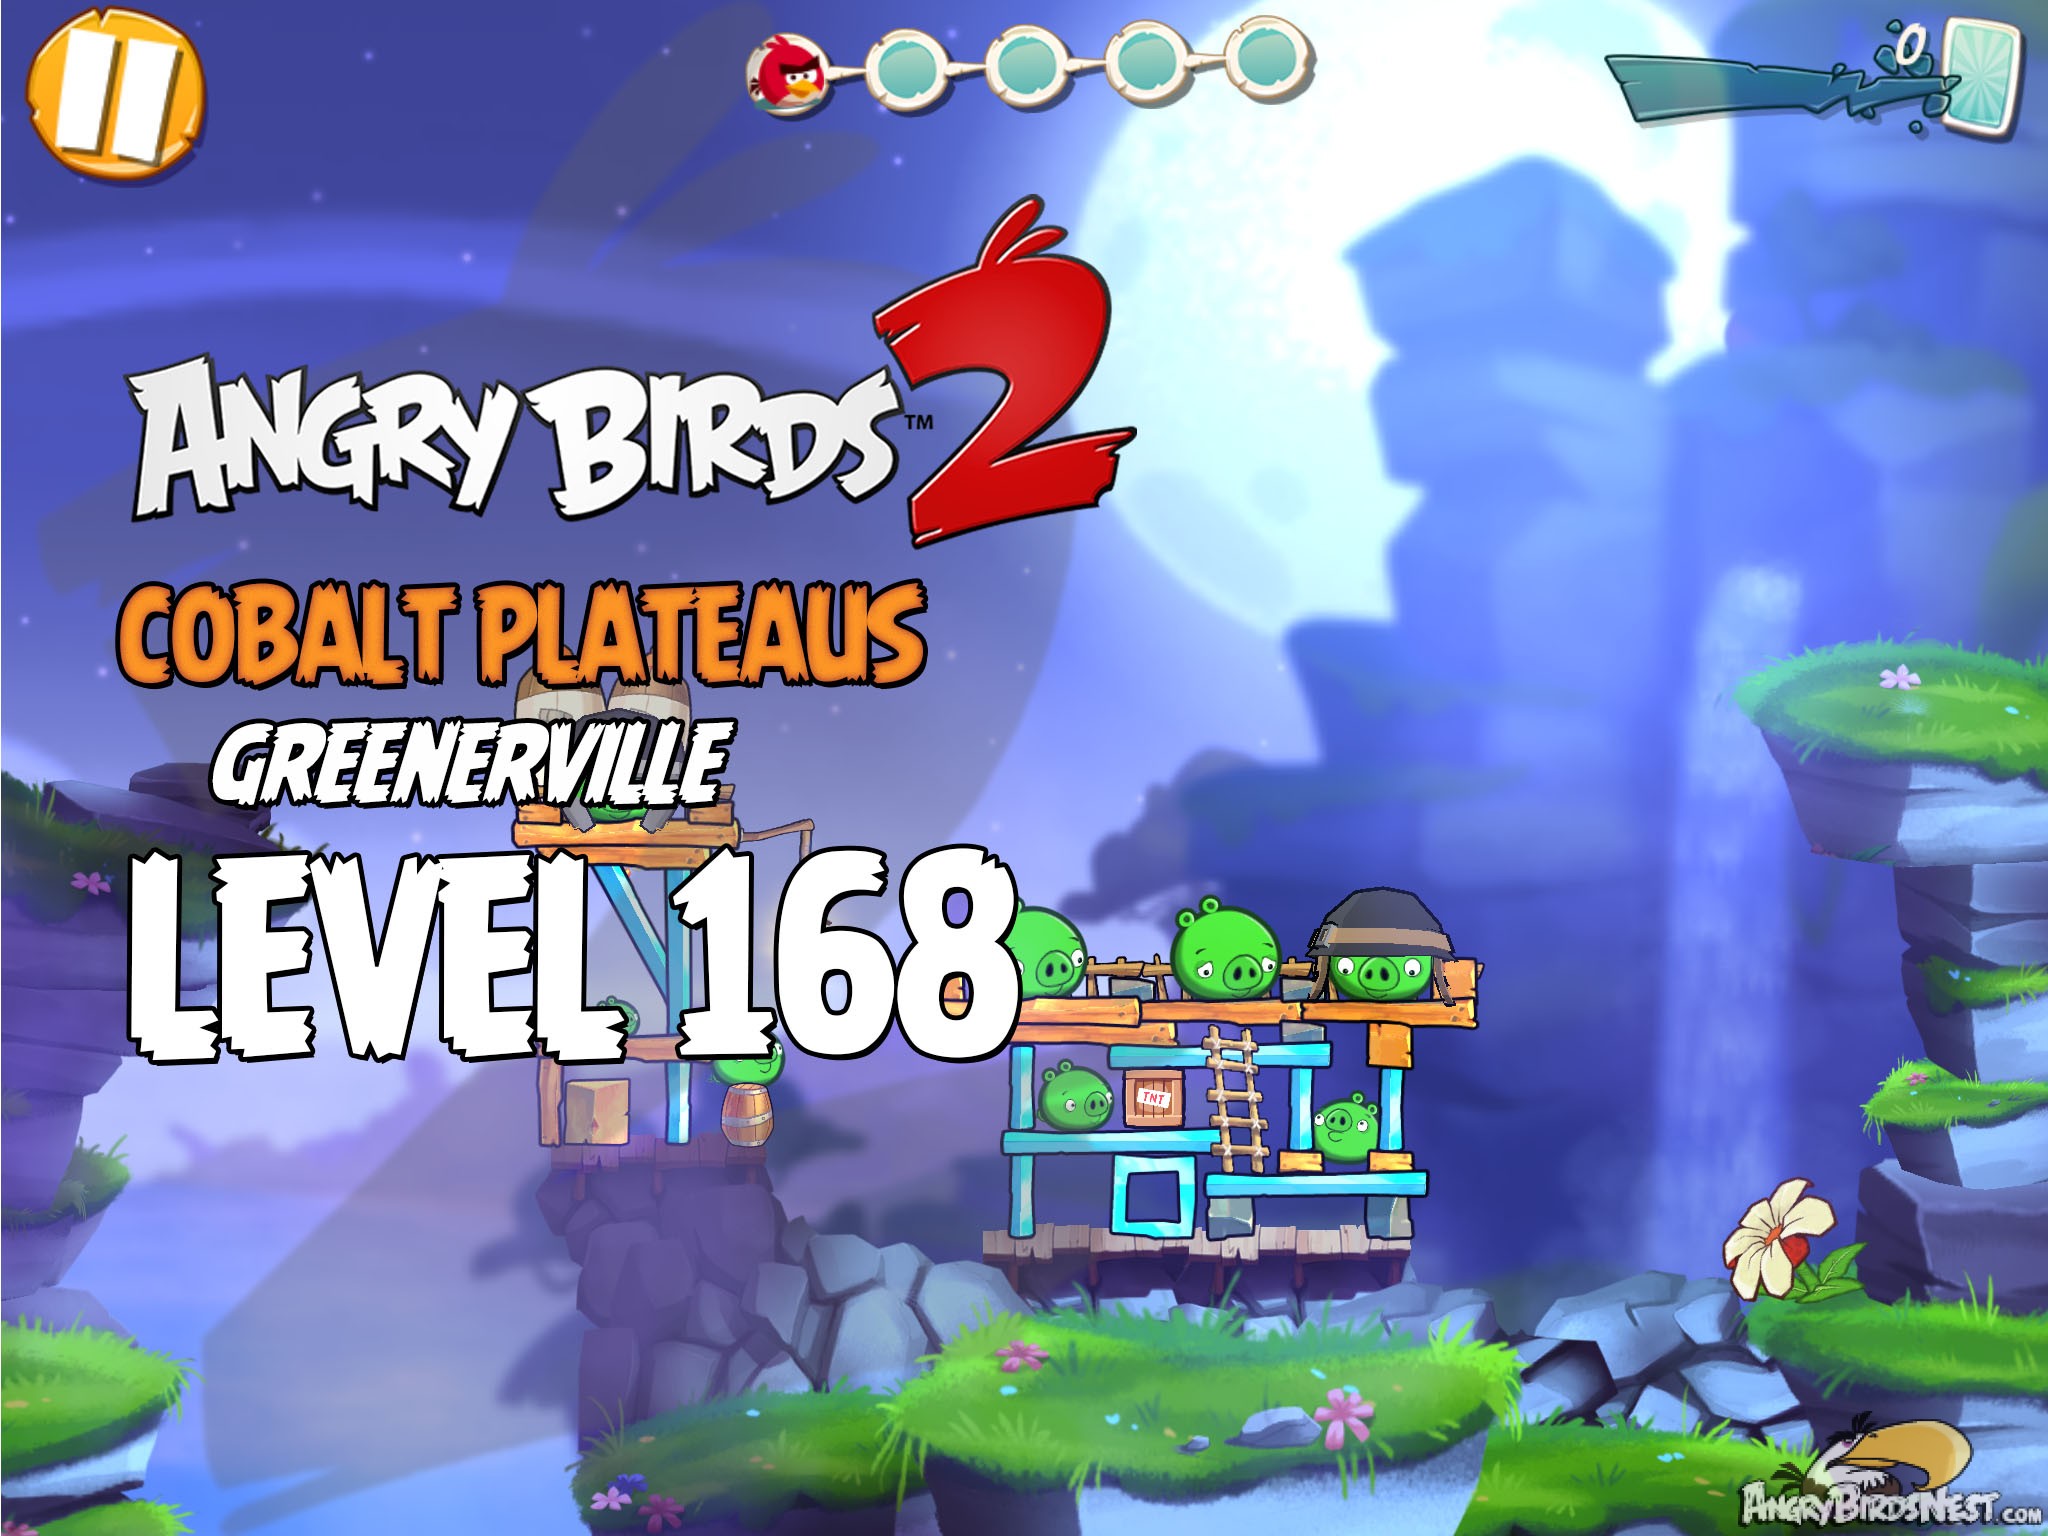 Angry Birds 2 Cobalt Plateaus Greenerville Level 168